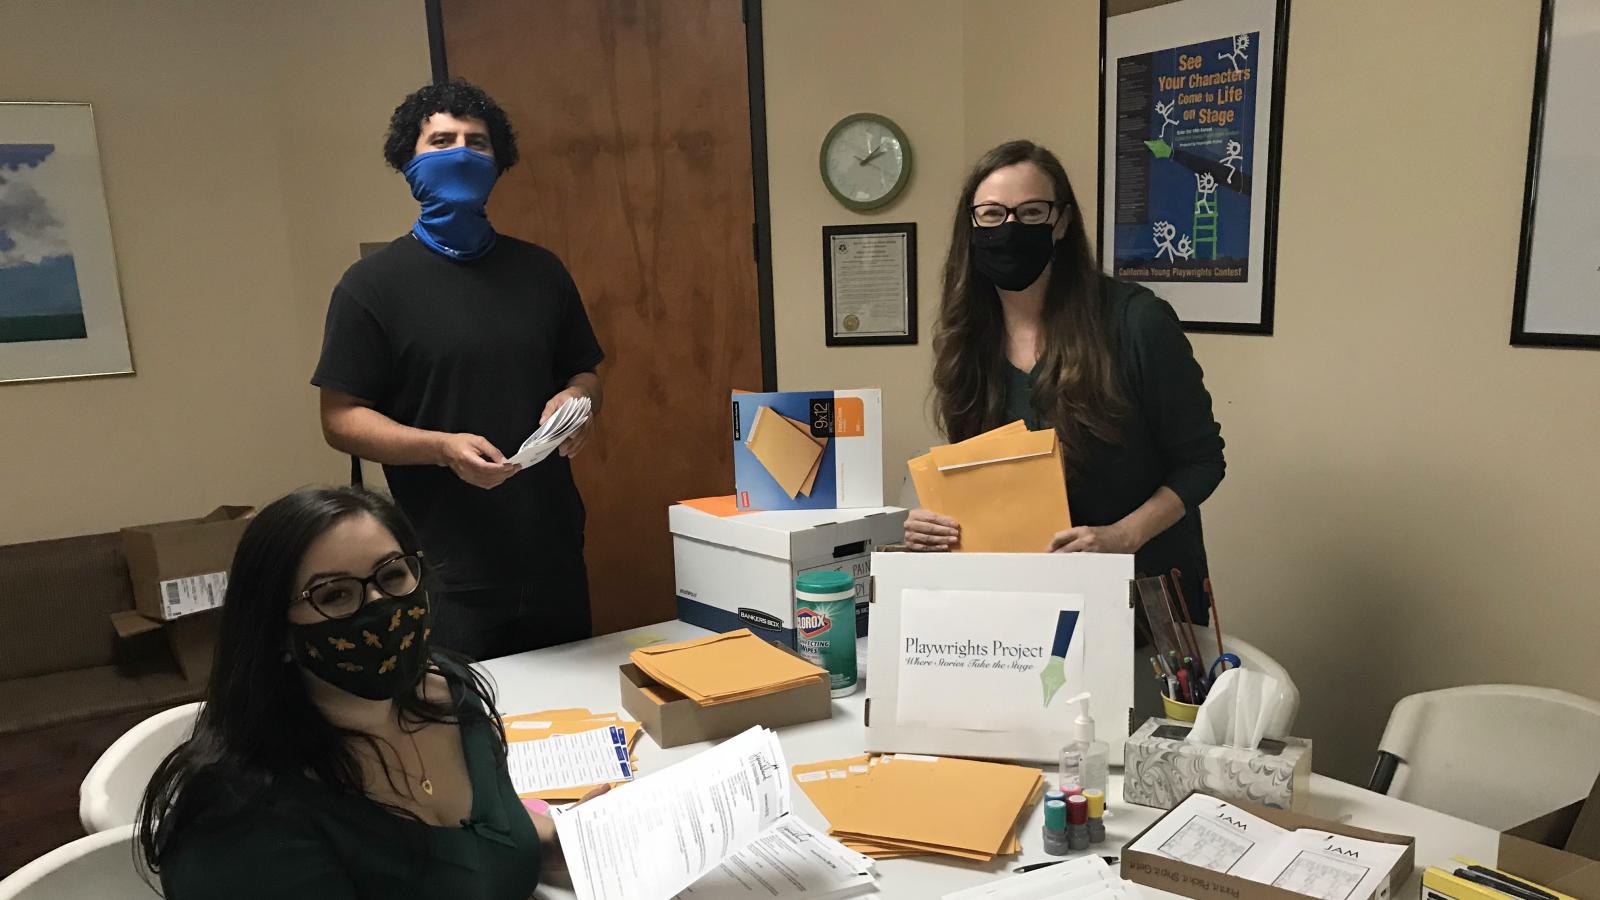 Three people wearing masks look at the camera as they prepare large envelopes for mailing